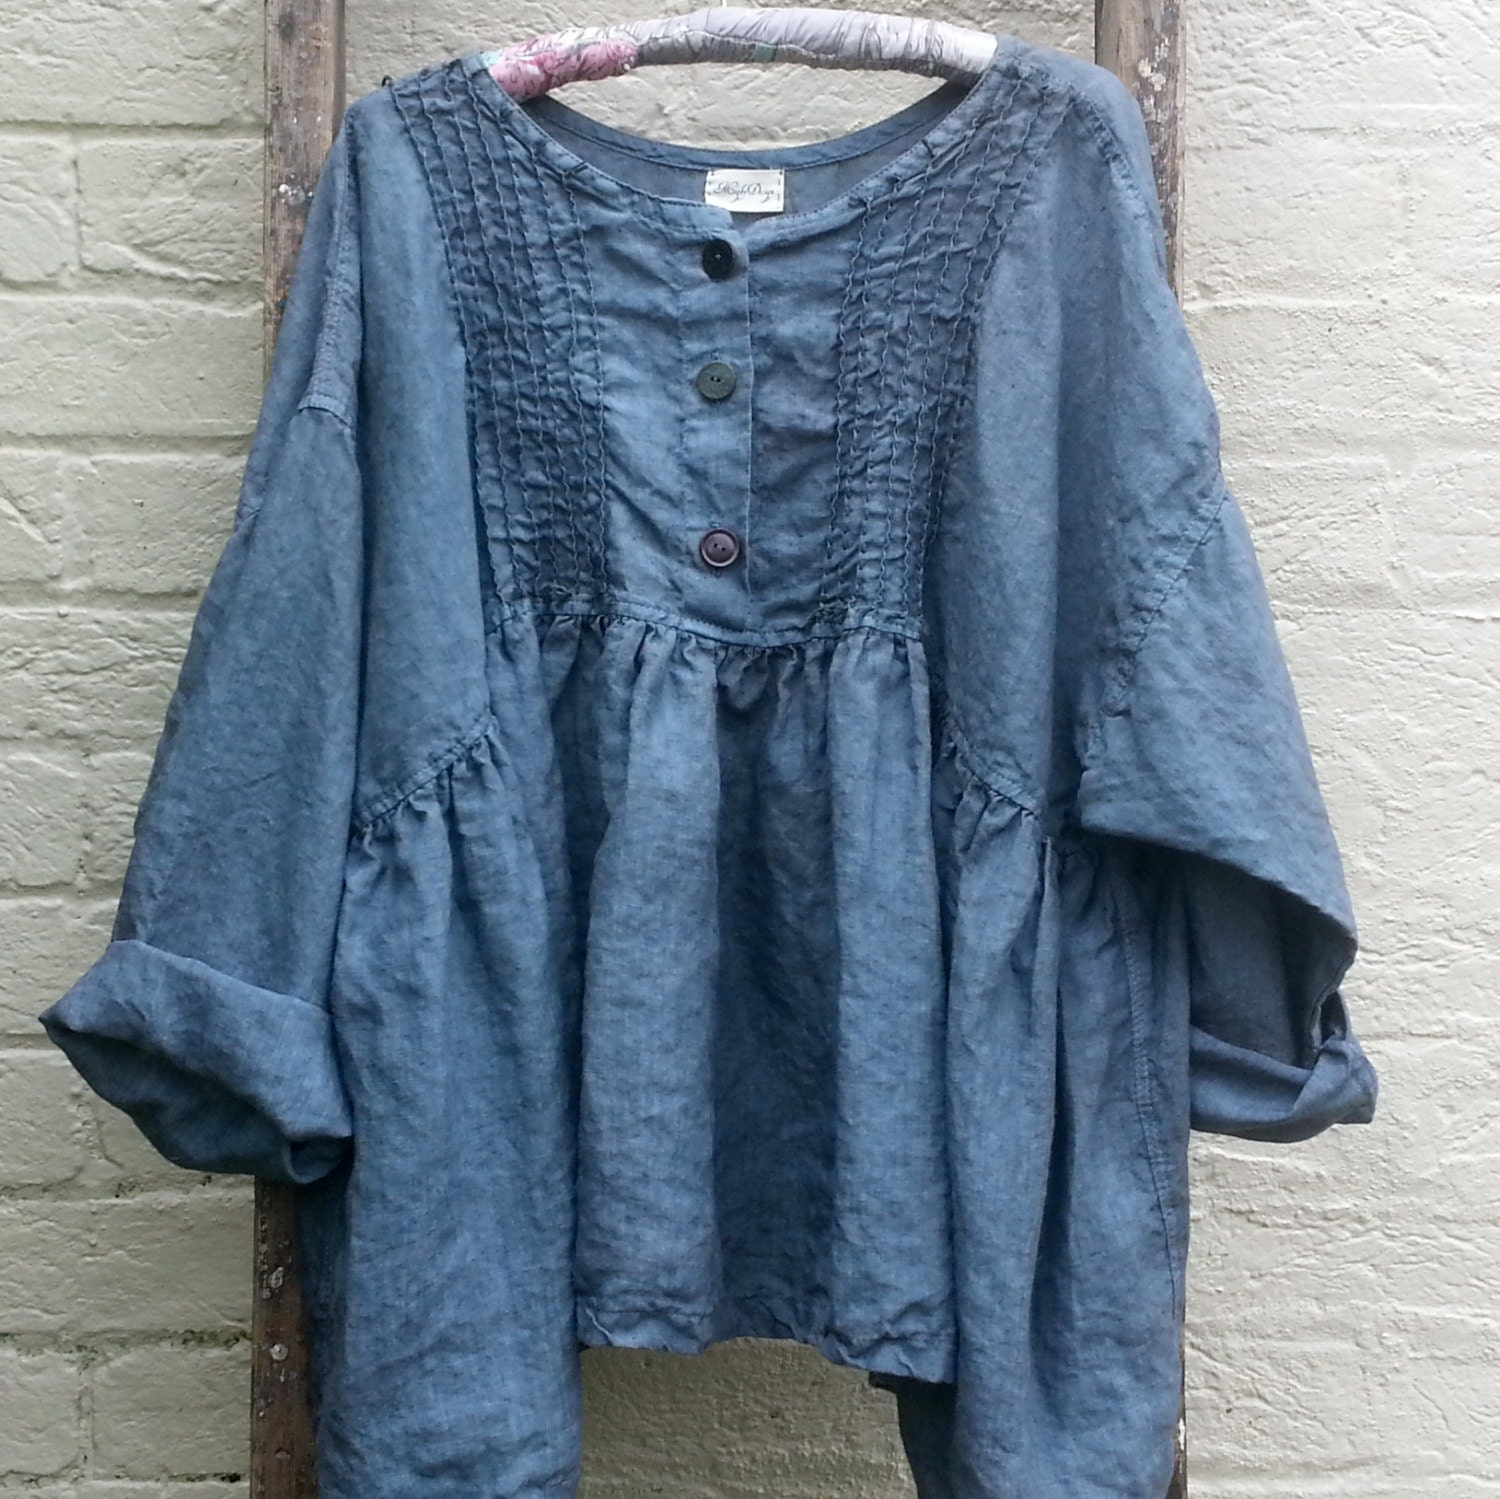 Prairie Linen Shirt Oversized to Fit Most by MegbyDesign on Etsy